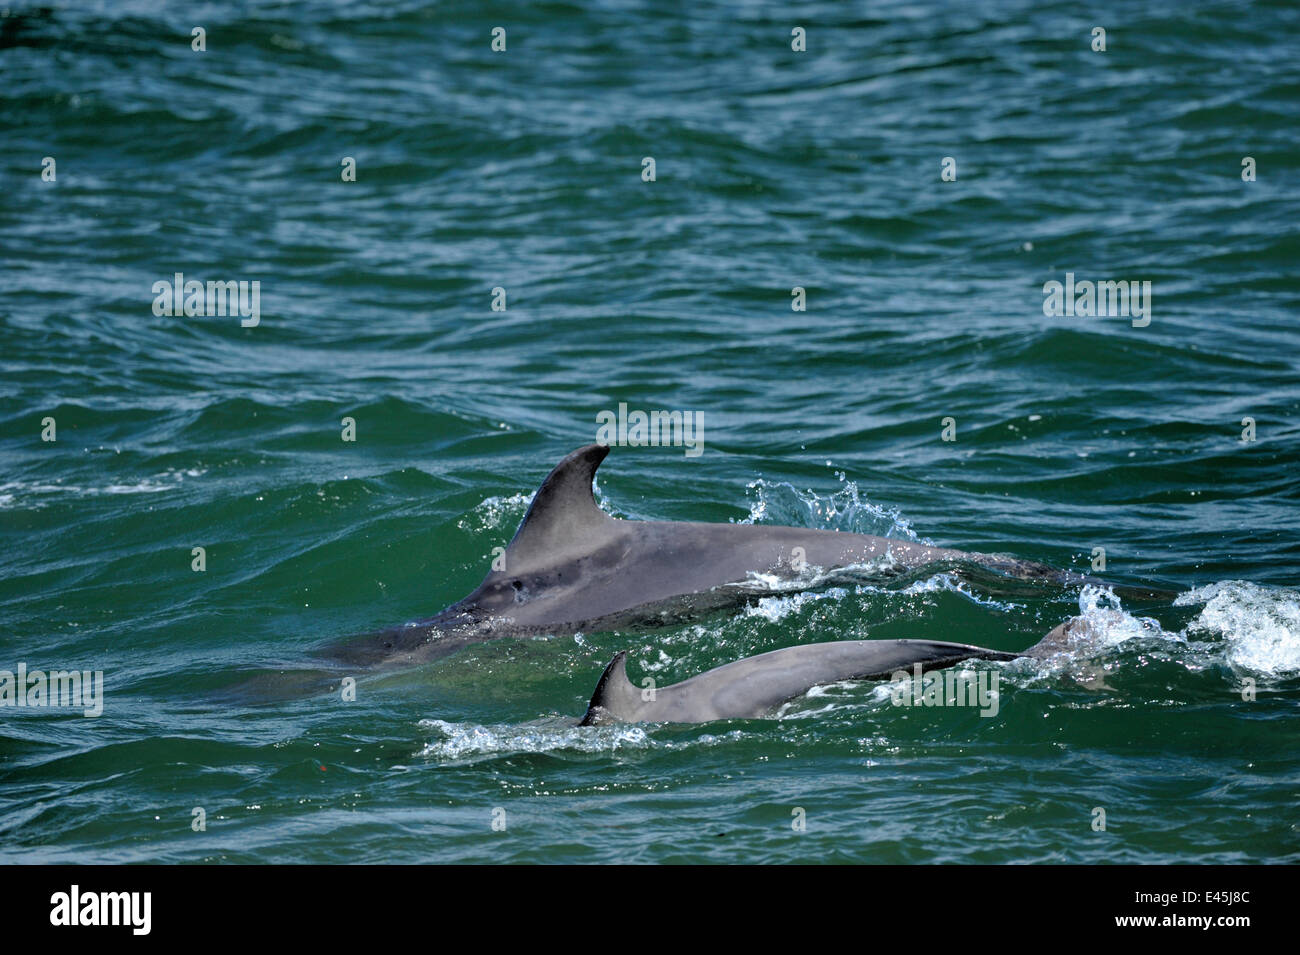 Two Bottlenosed dolphins (Tursiops truncatus) surfacing, Moray Firth, Nr Inverness, Scotland, May 2009 Stock Photo